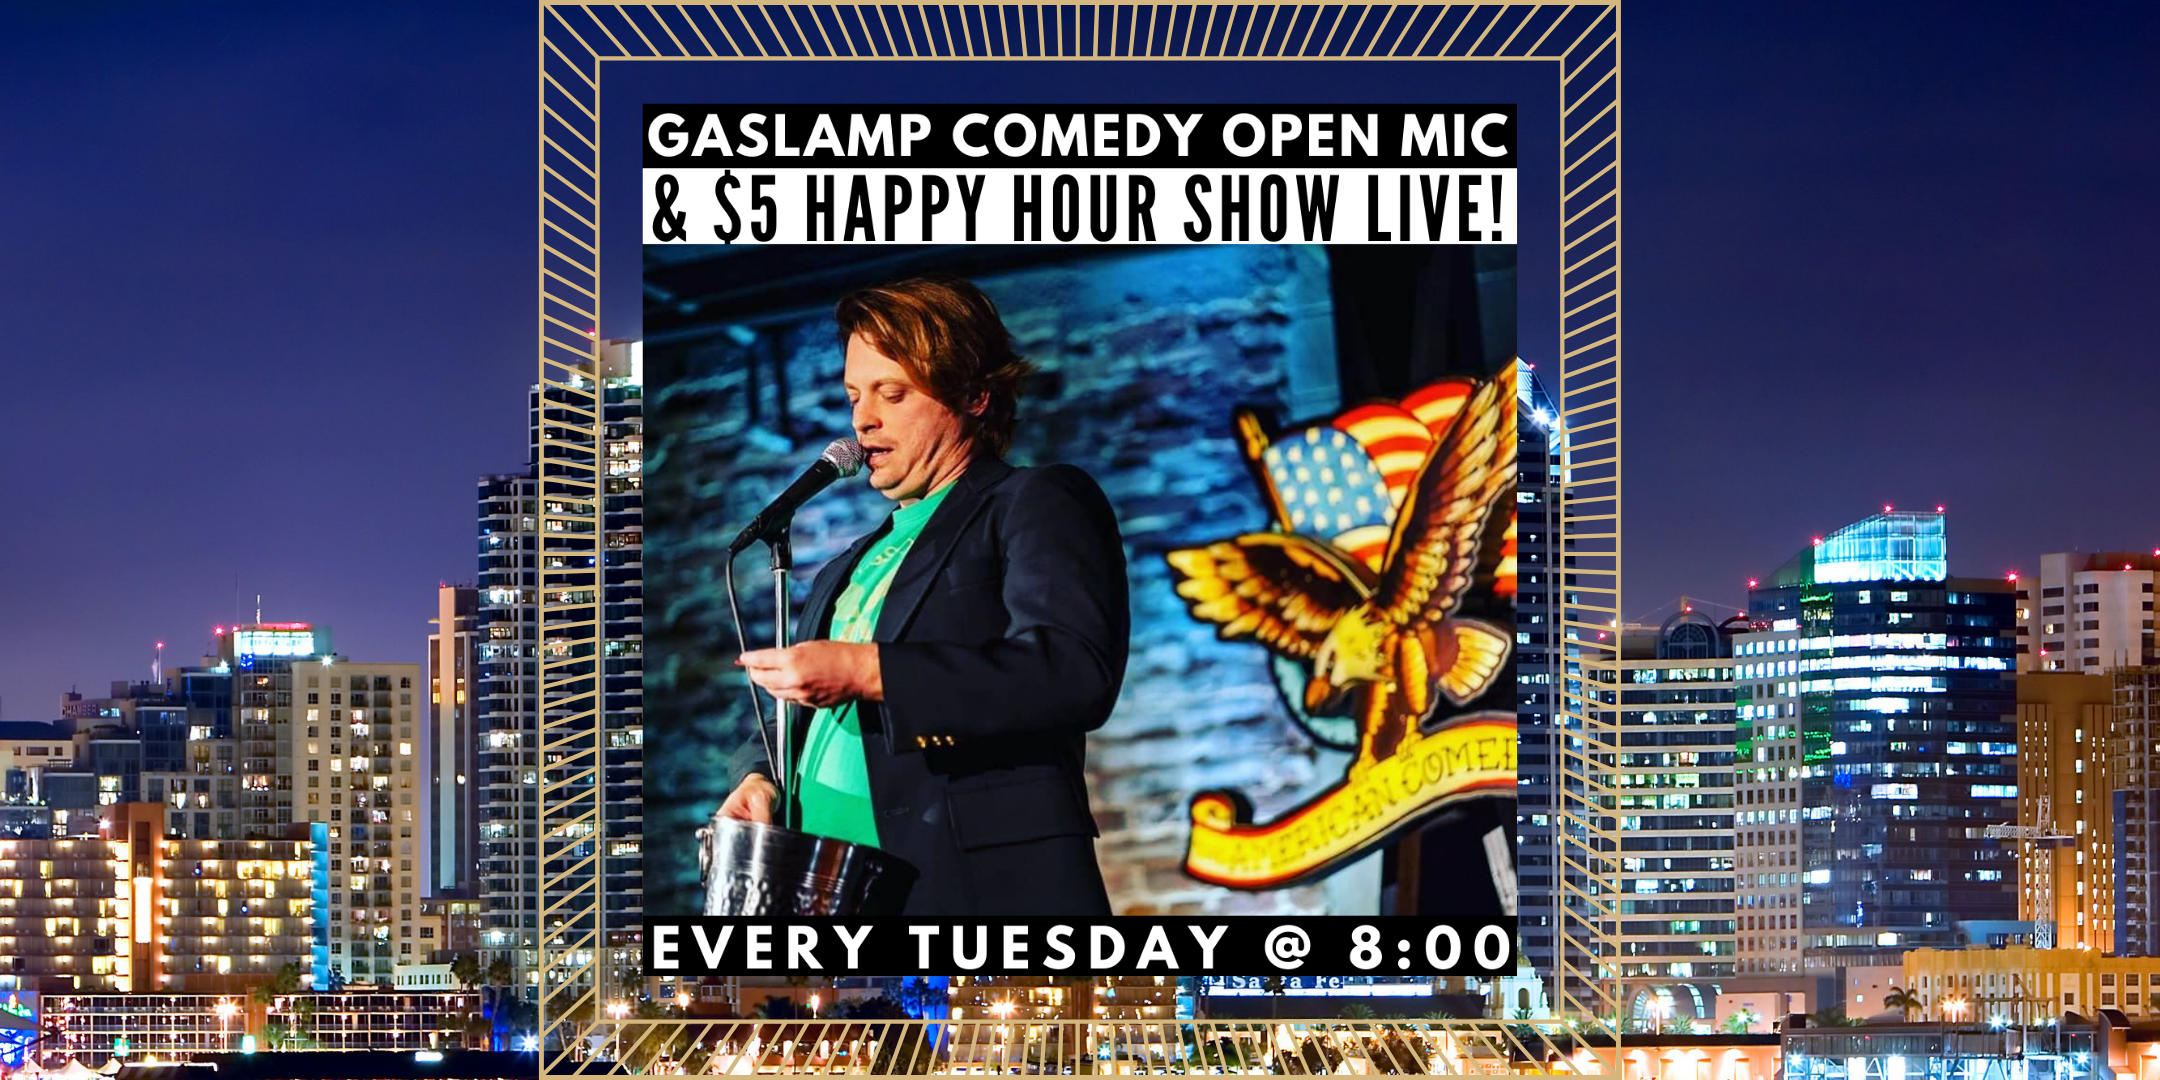 Gaslamp Comedy Open Mic & $5 Happy Hour Show LIVE! [Stand-Up Comedy]